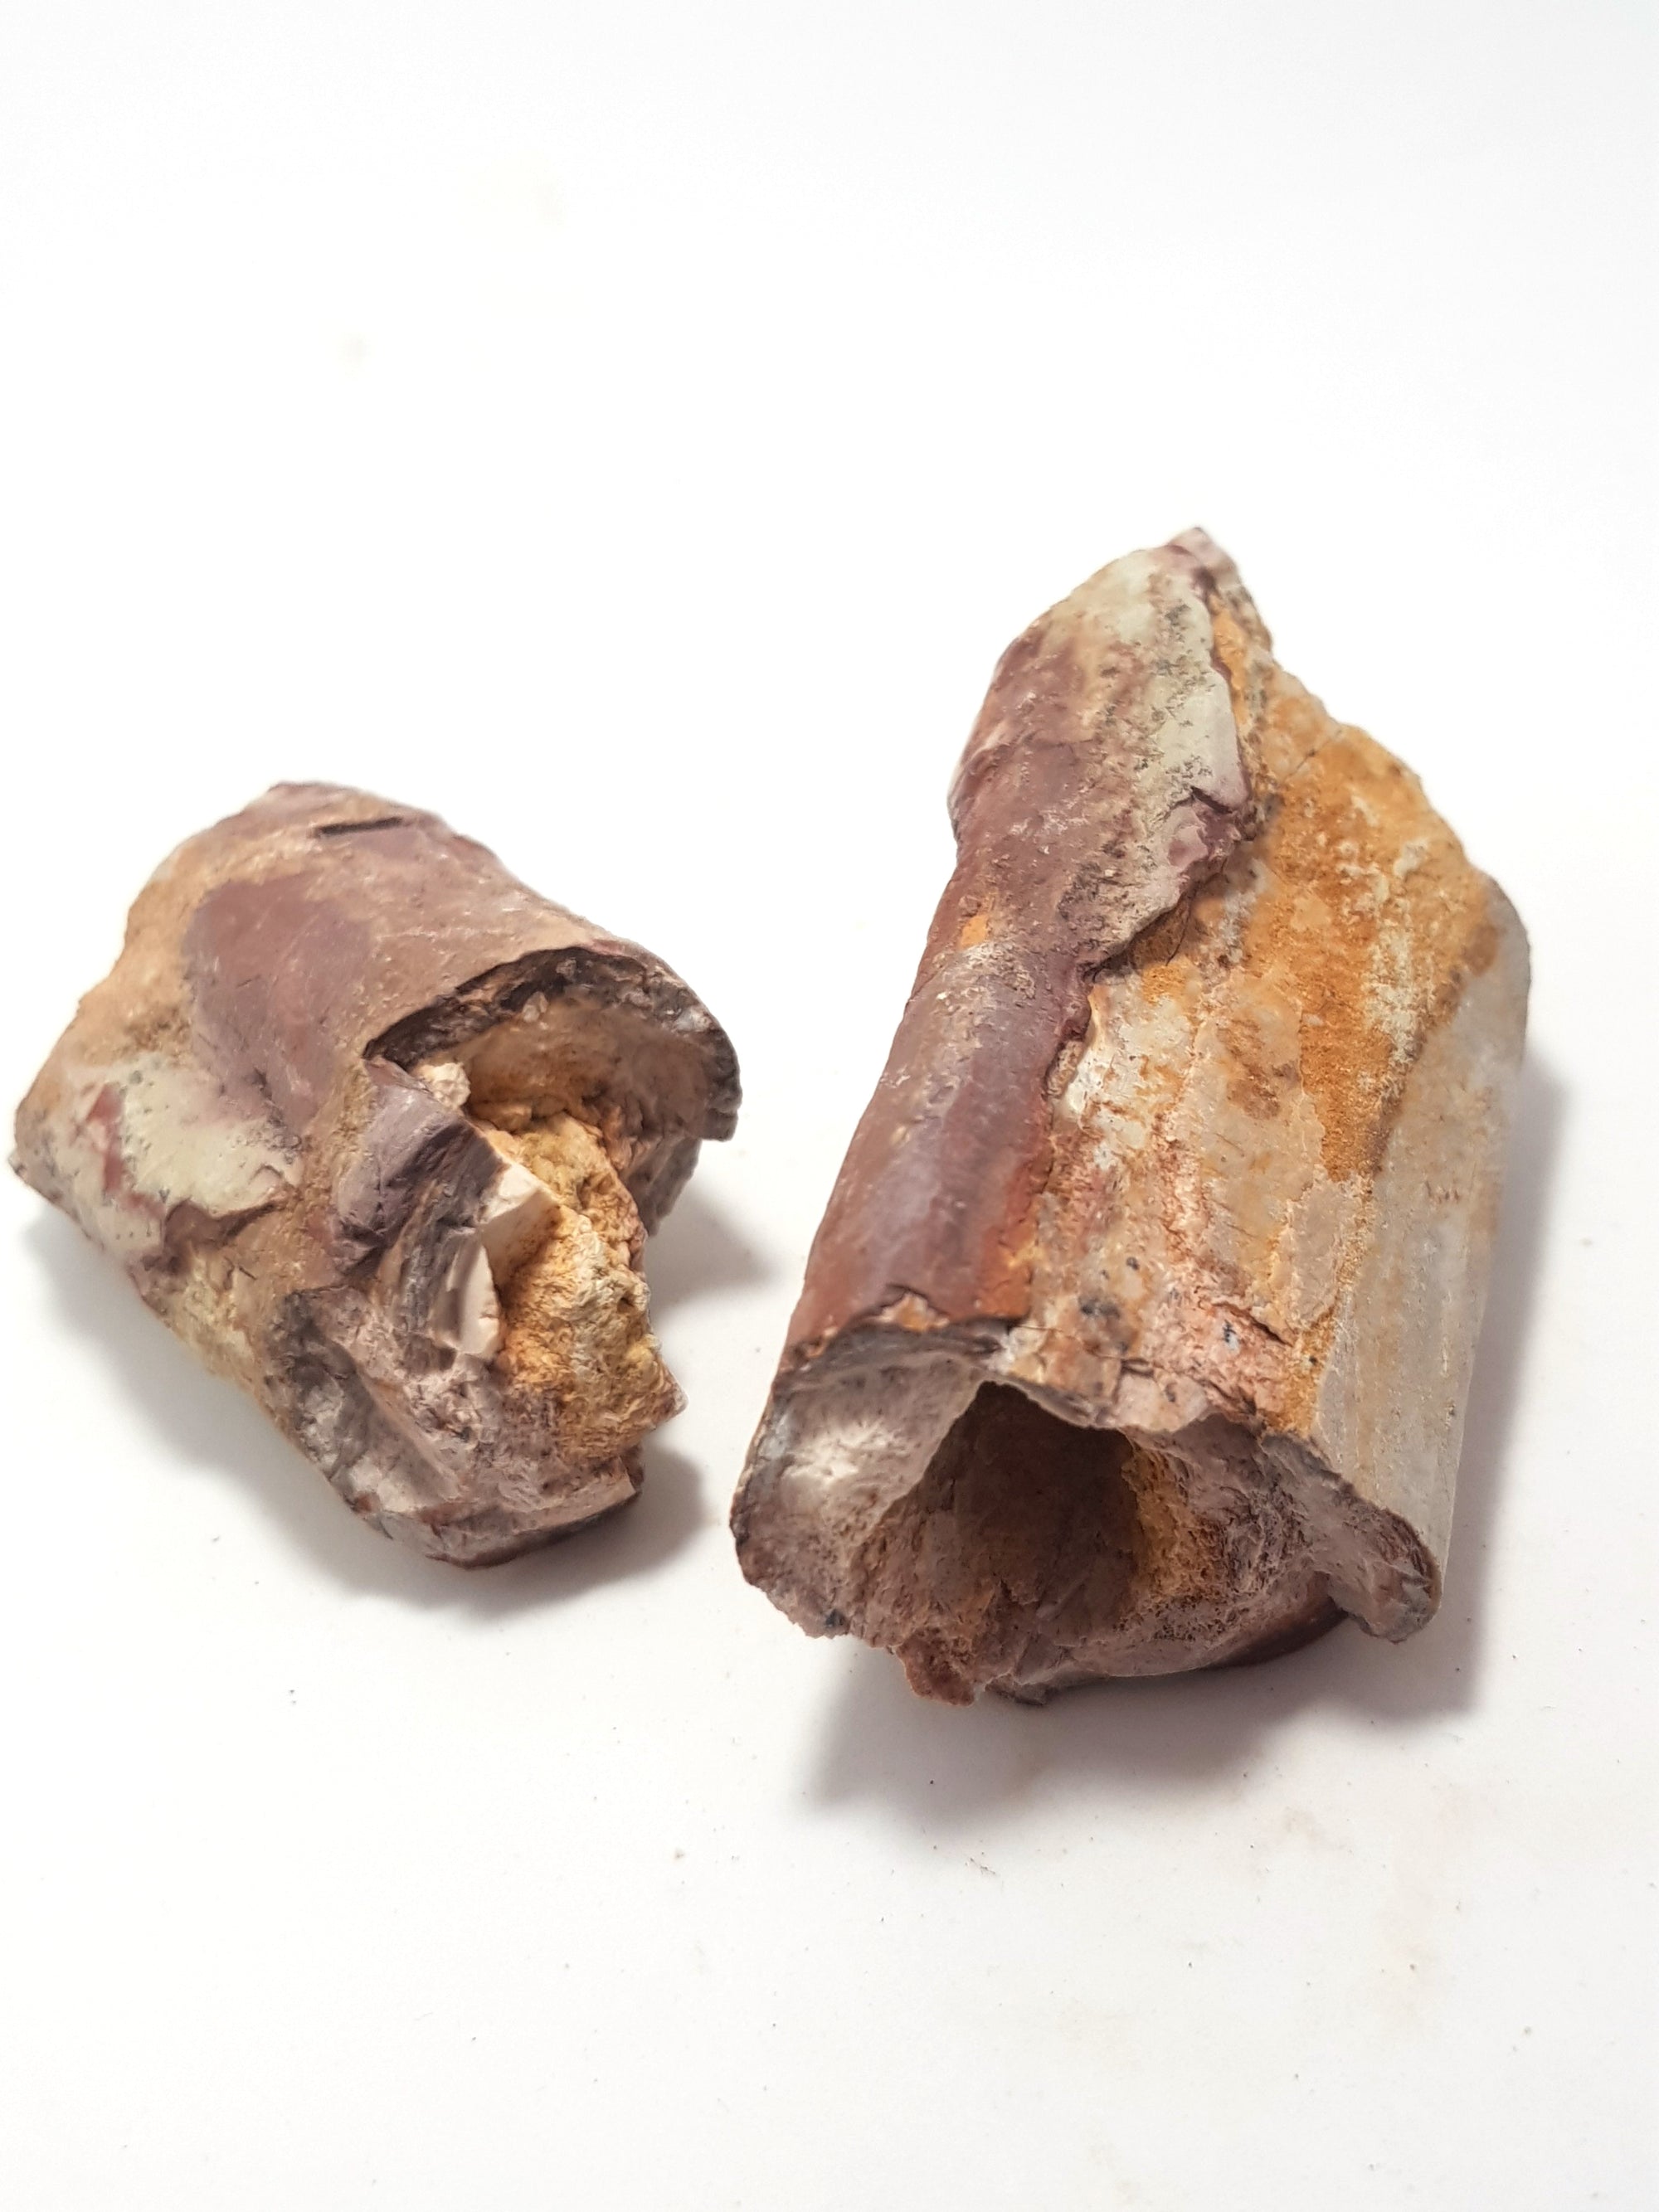 2 pieces of therapod dinosaur rib in cross section. the bone is dark brown. The interior of the bones is completely hollow.